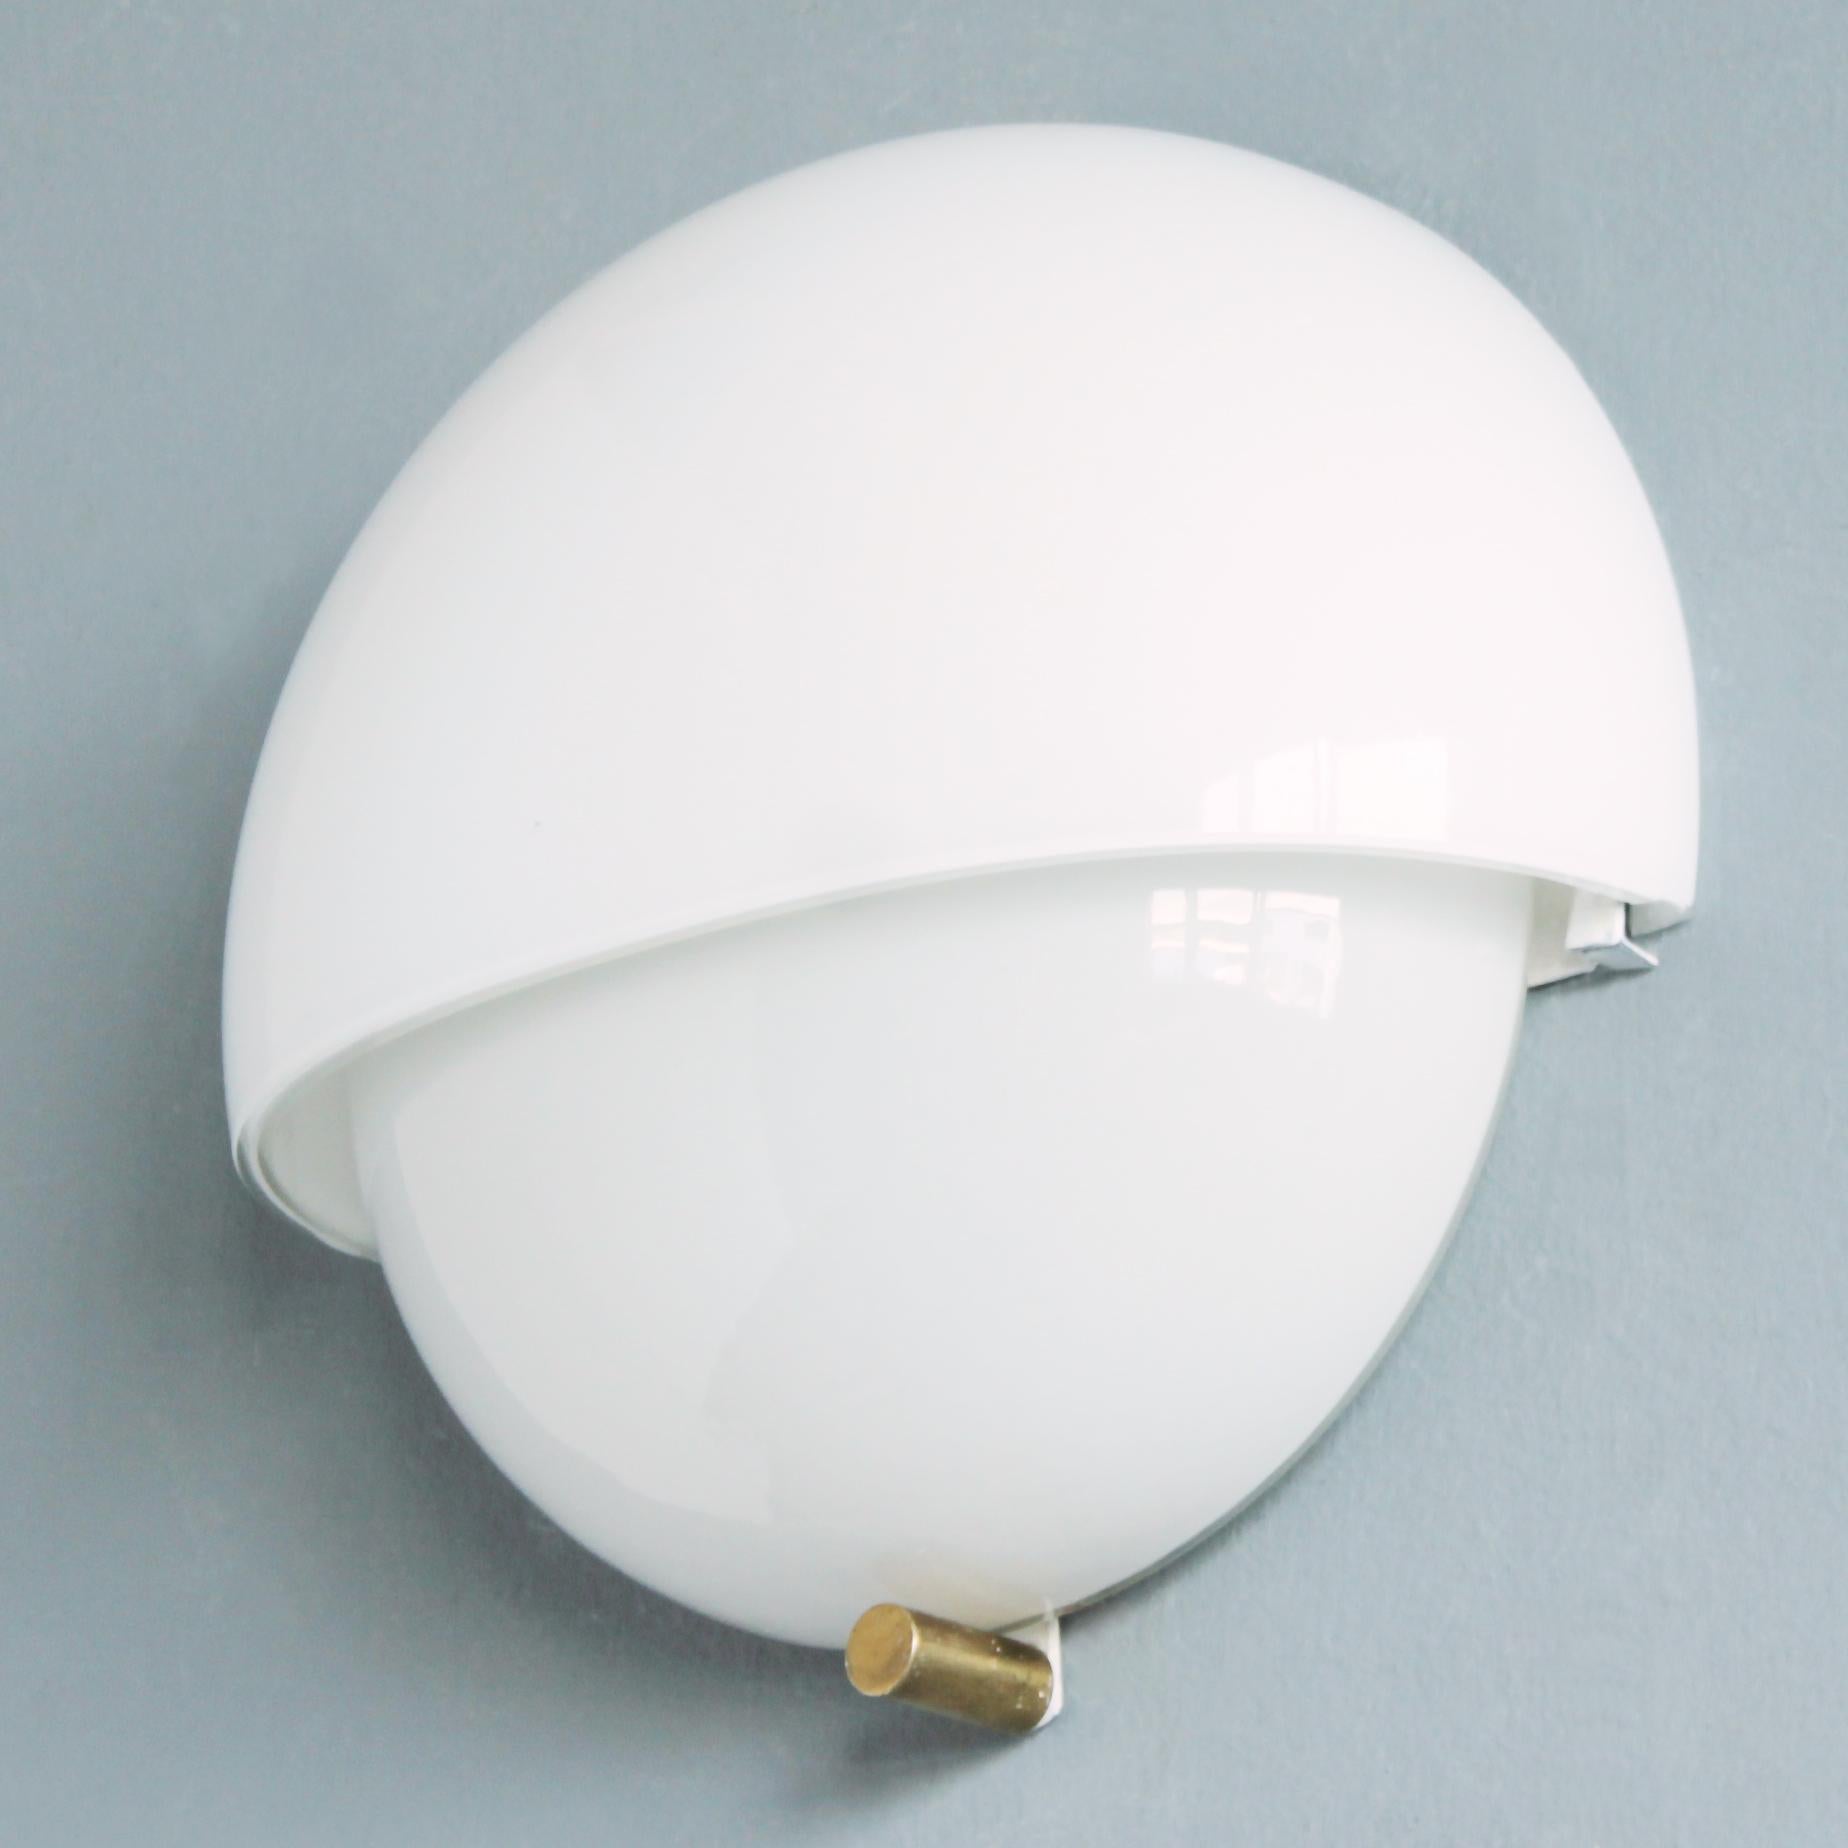 Mid-Century Modern Wall Light 'Mania' by Vico Magistretti for Artimide, 1963